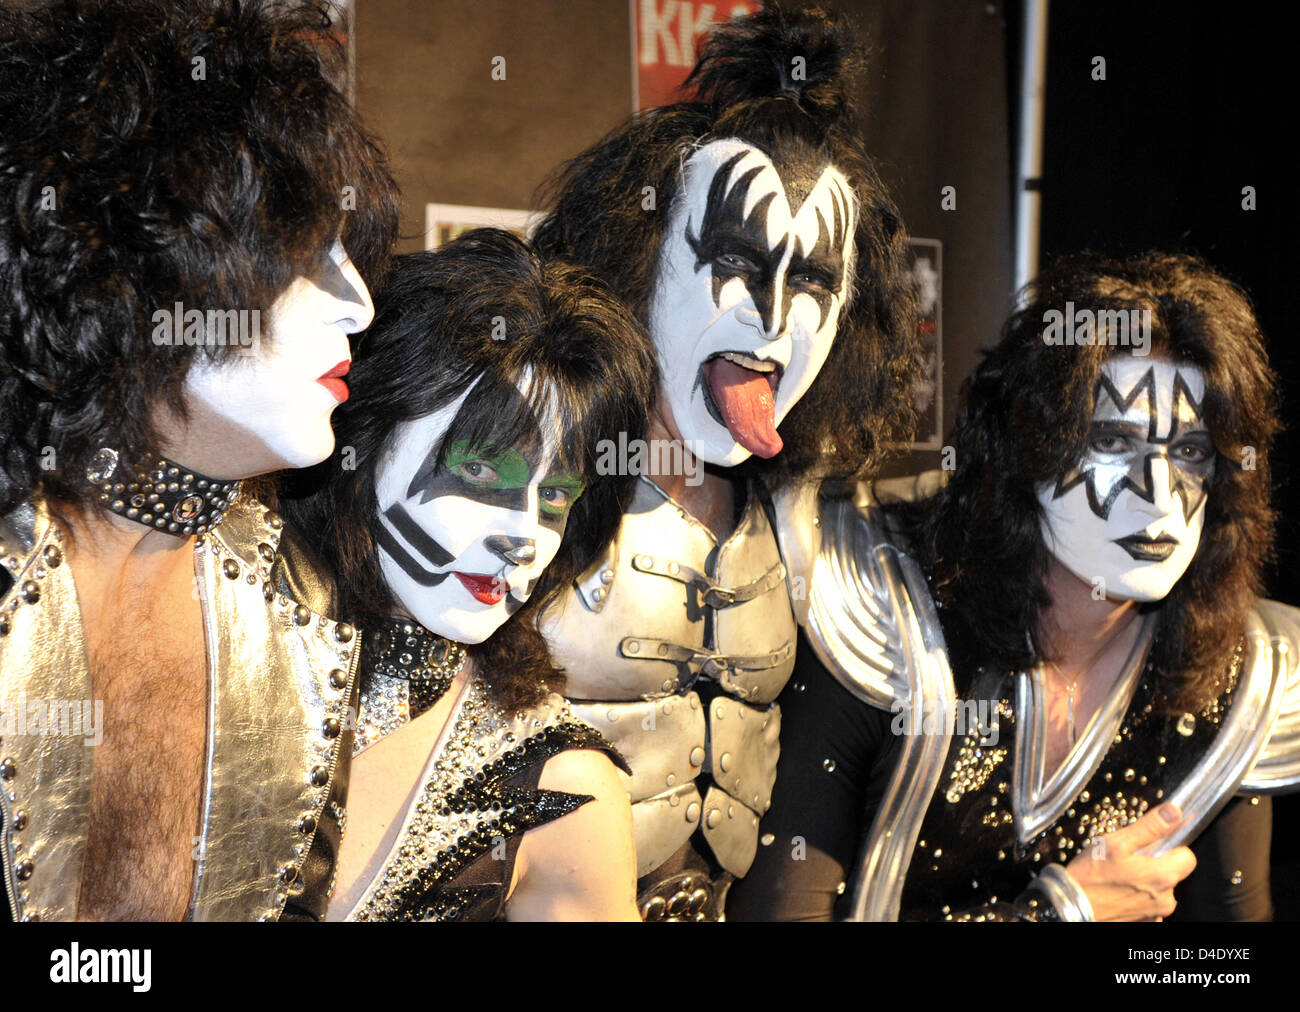 Featured image of post Kiss The Band Images / Hd wallpapers and background images.